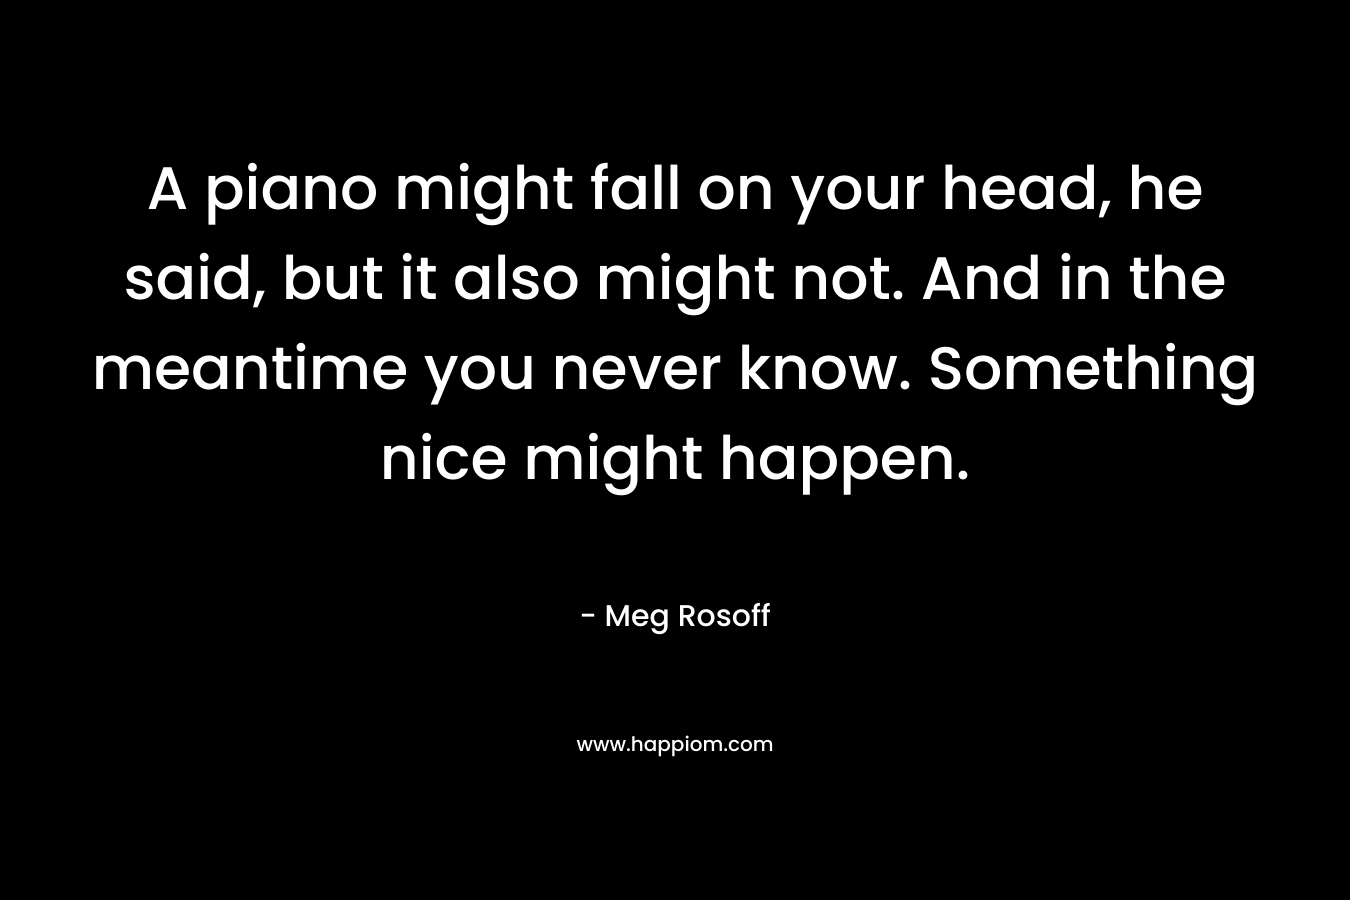 A piano might fall on your head, he said, but it also might not. And in the meantime you never know. Something nice might happen. – Meg Rosoff